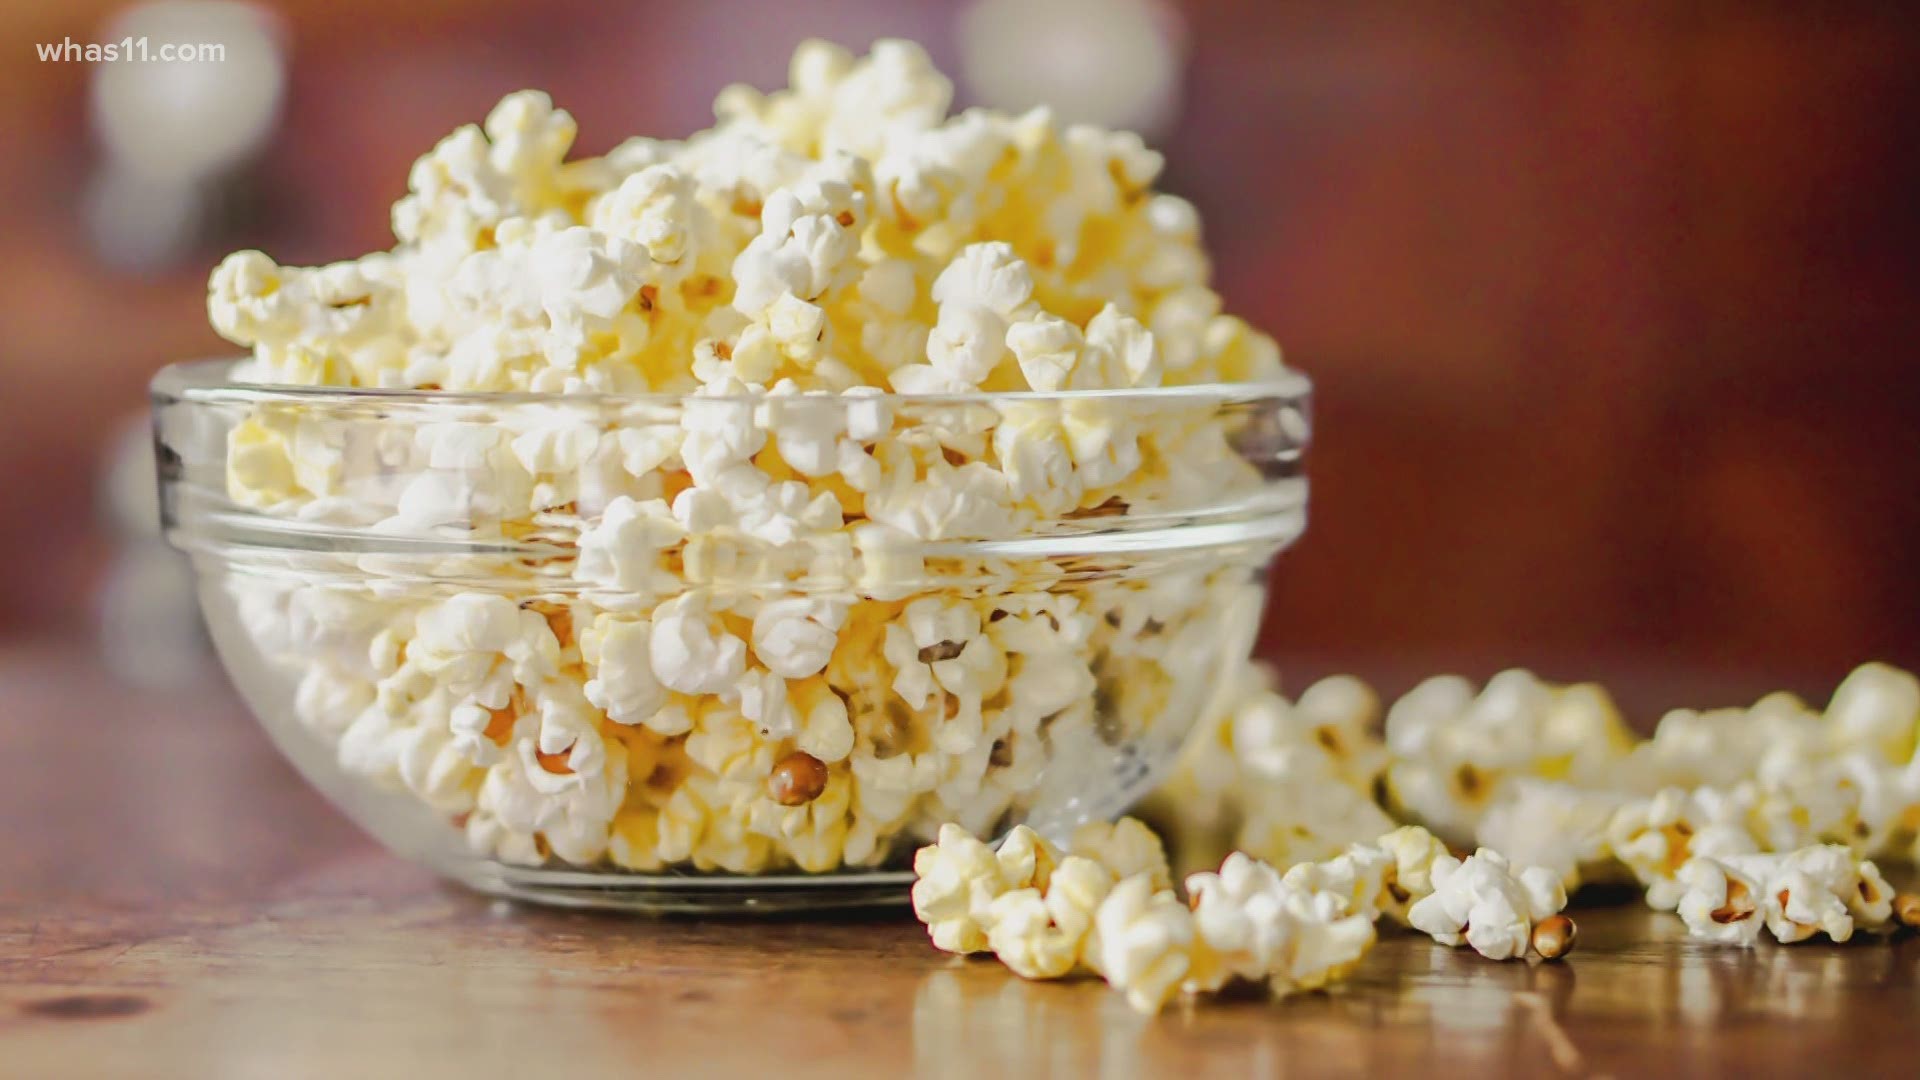 Indiana ranks second in the country for popcorn production.